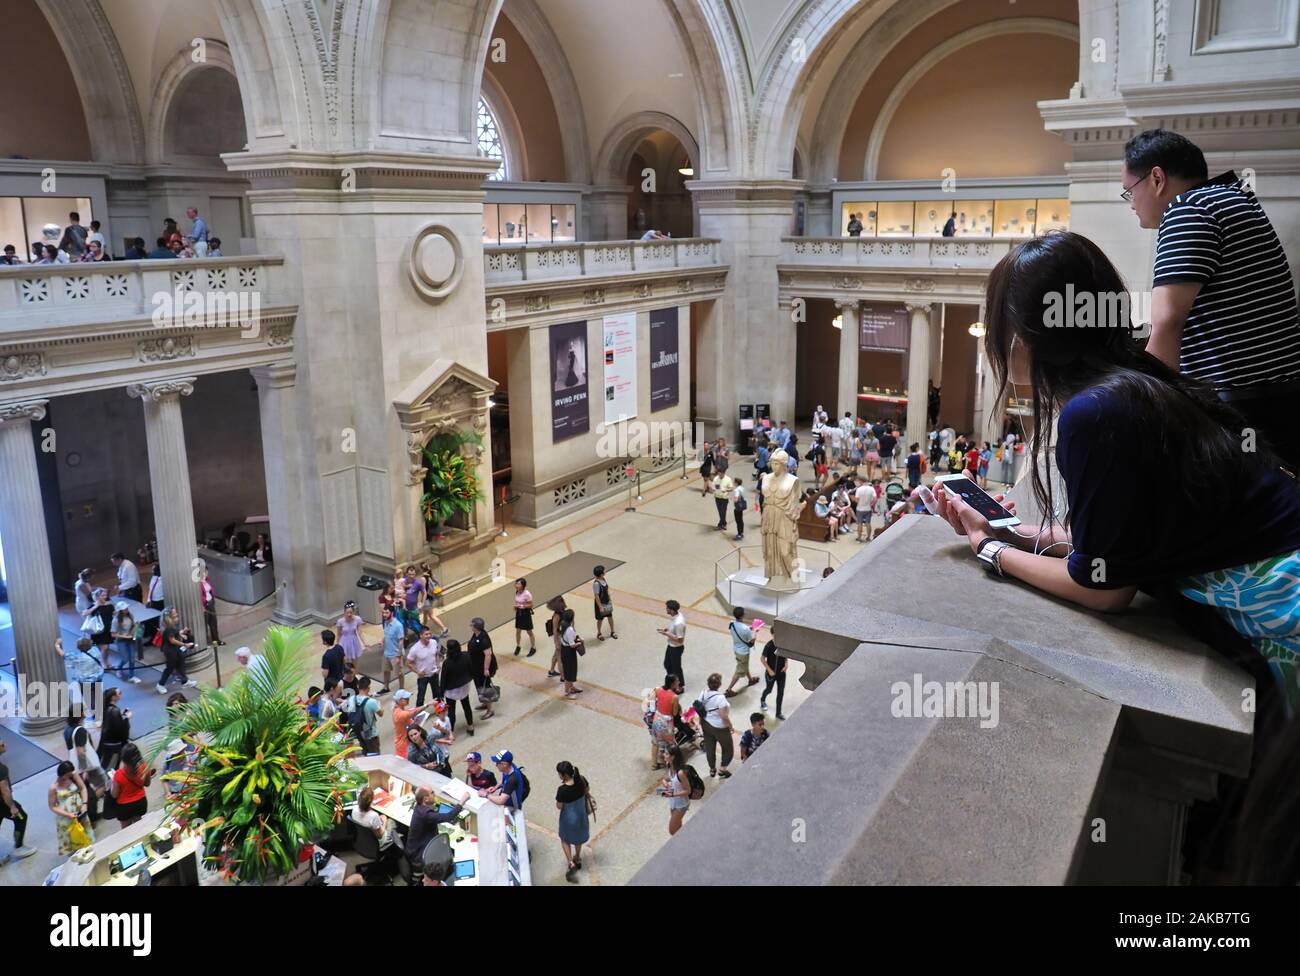 New York City, NY USA. Jul 2017. Asian tourists on second floor looking down on people visiting the Metropolitan Museum of Art. Stock Photo